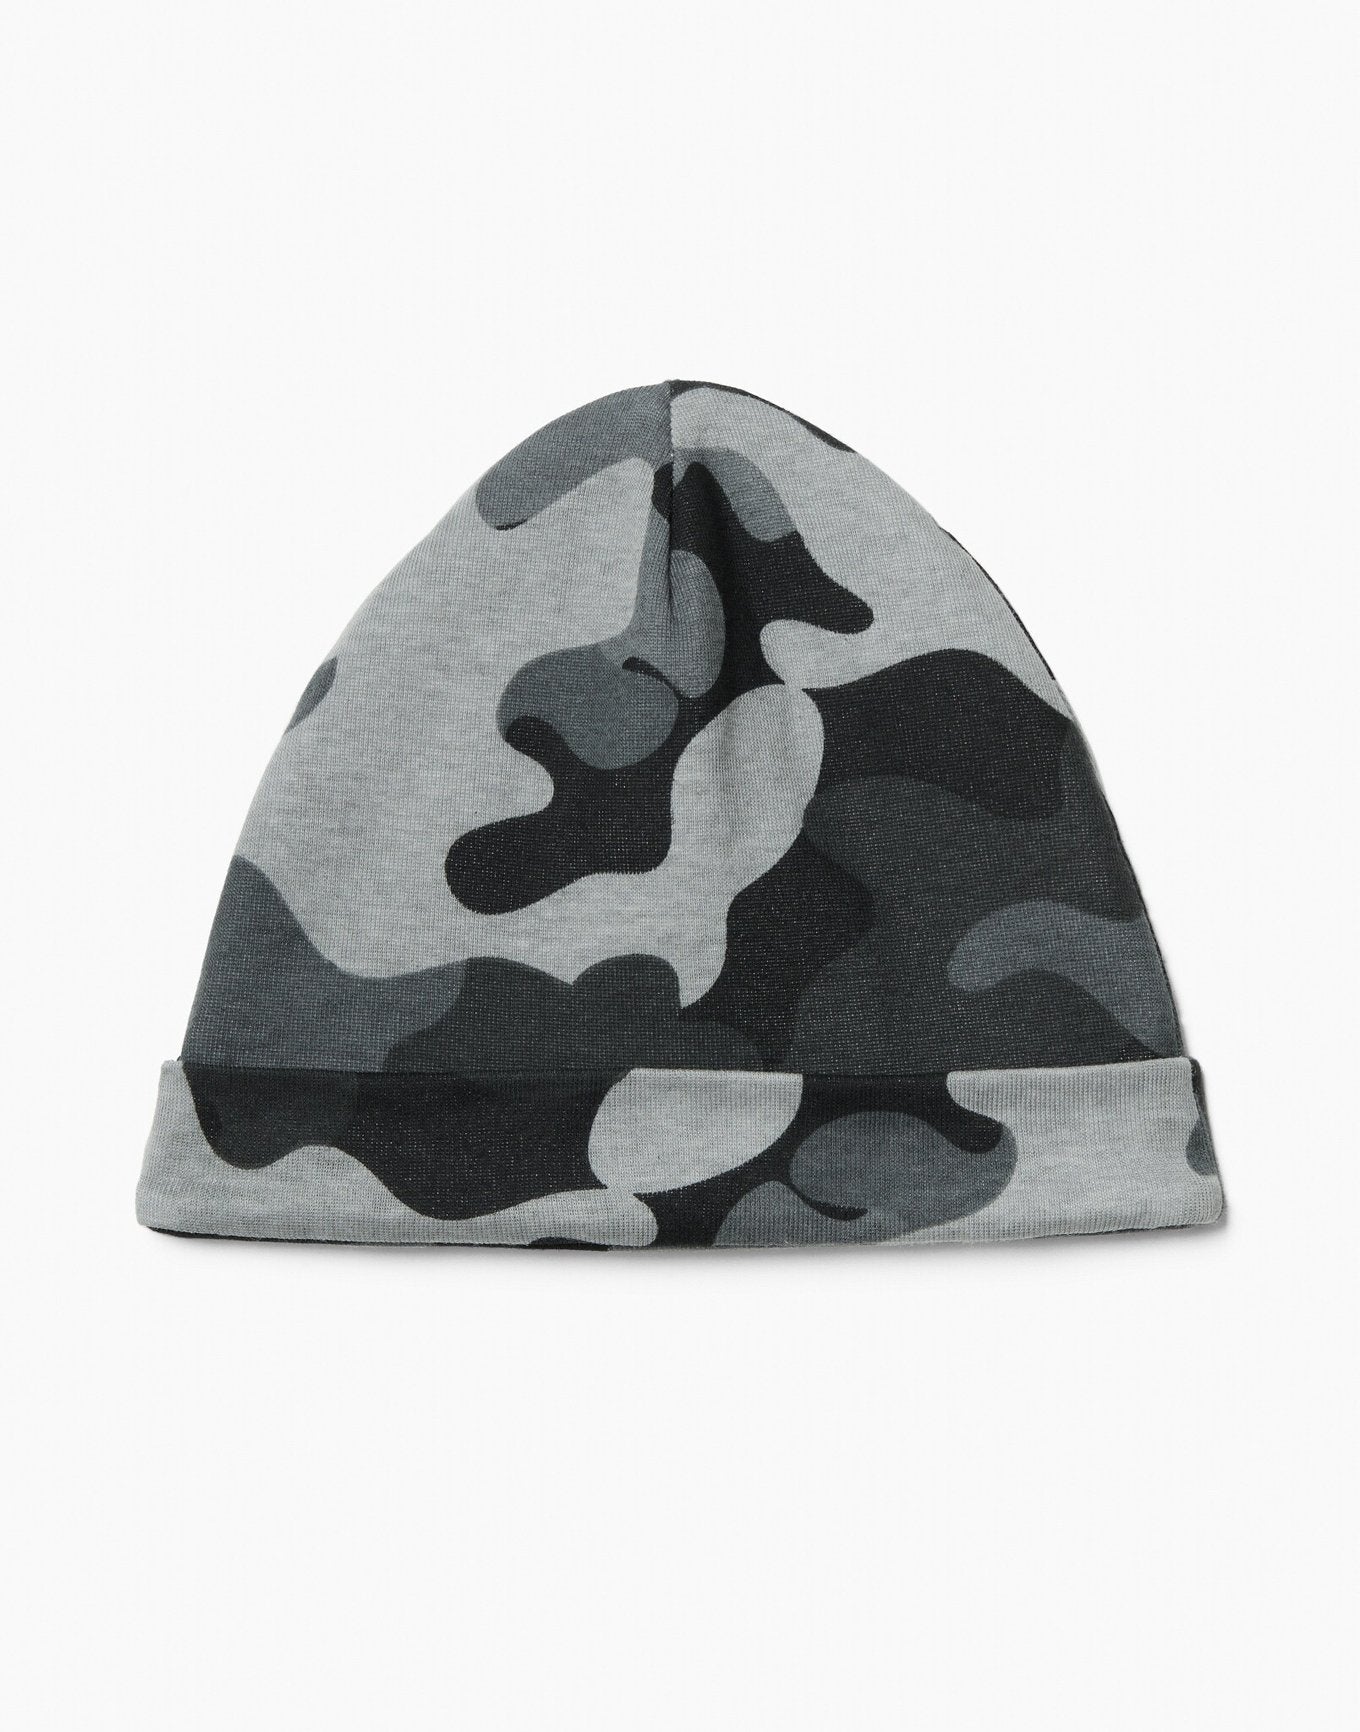 Outlines Kids Royal in color Black Camo and shape cap hat & beanie